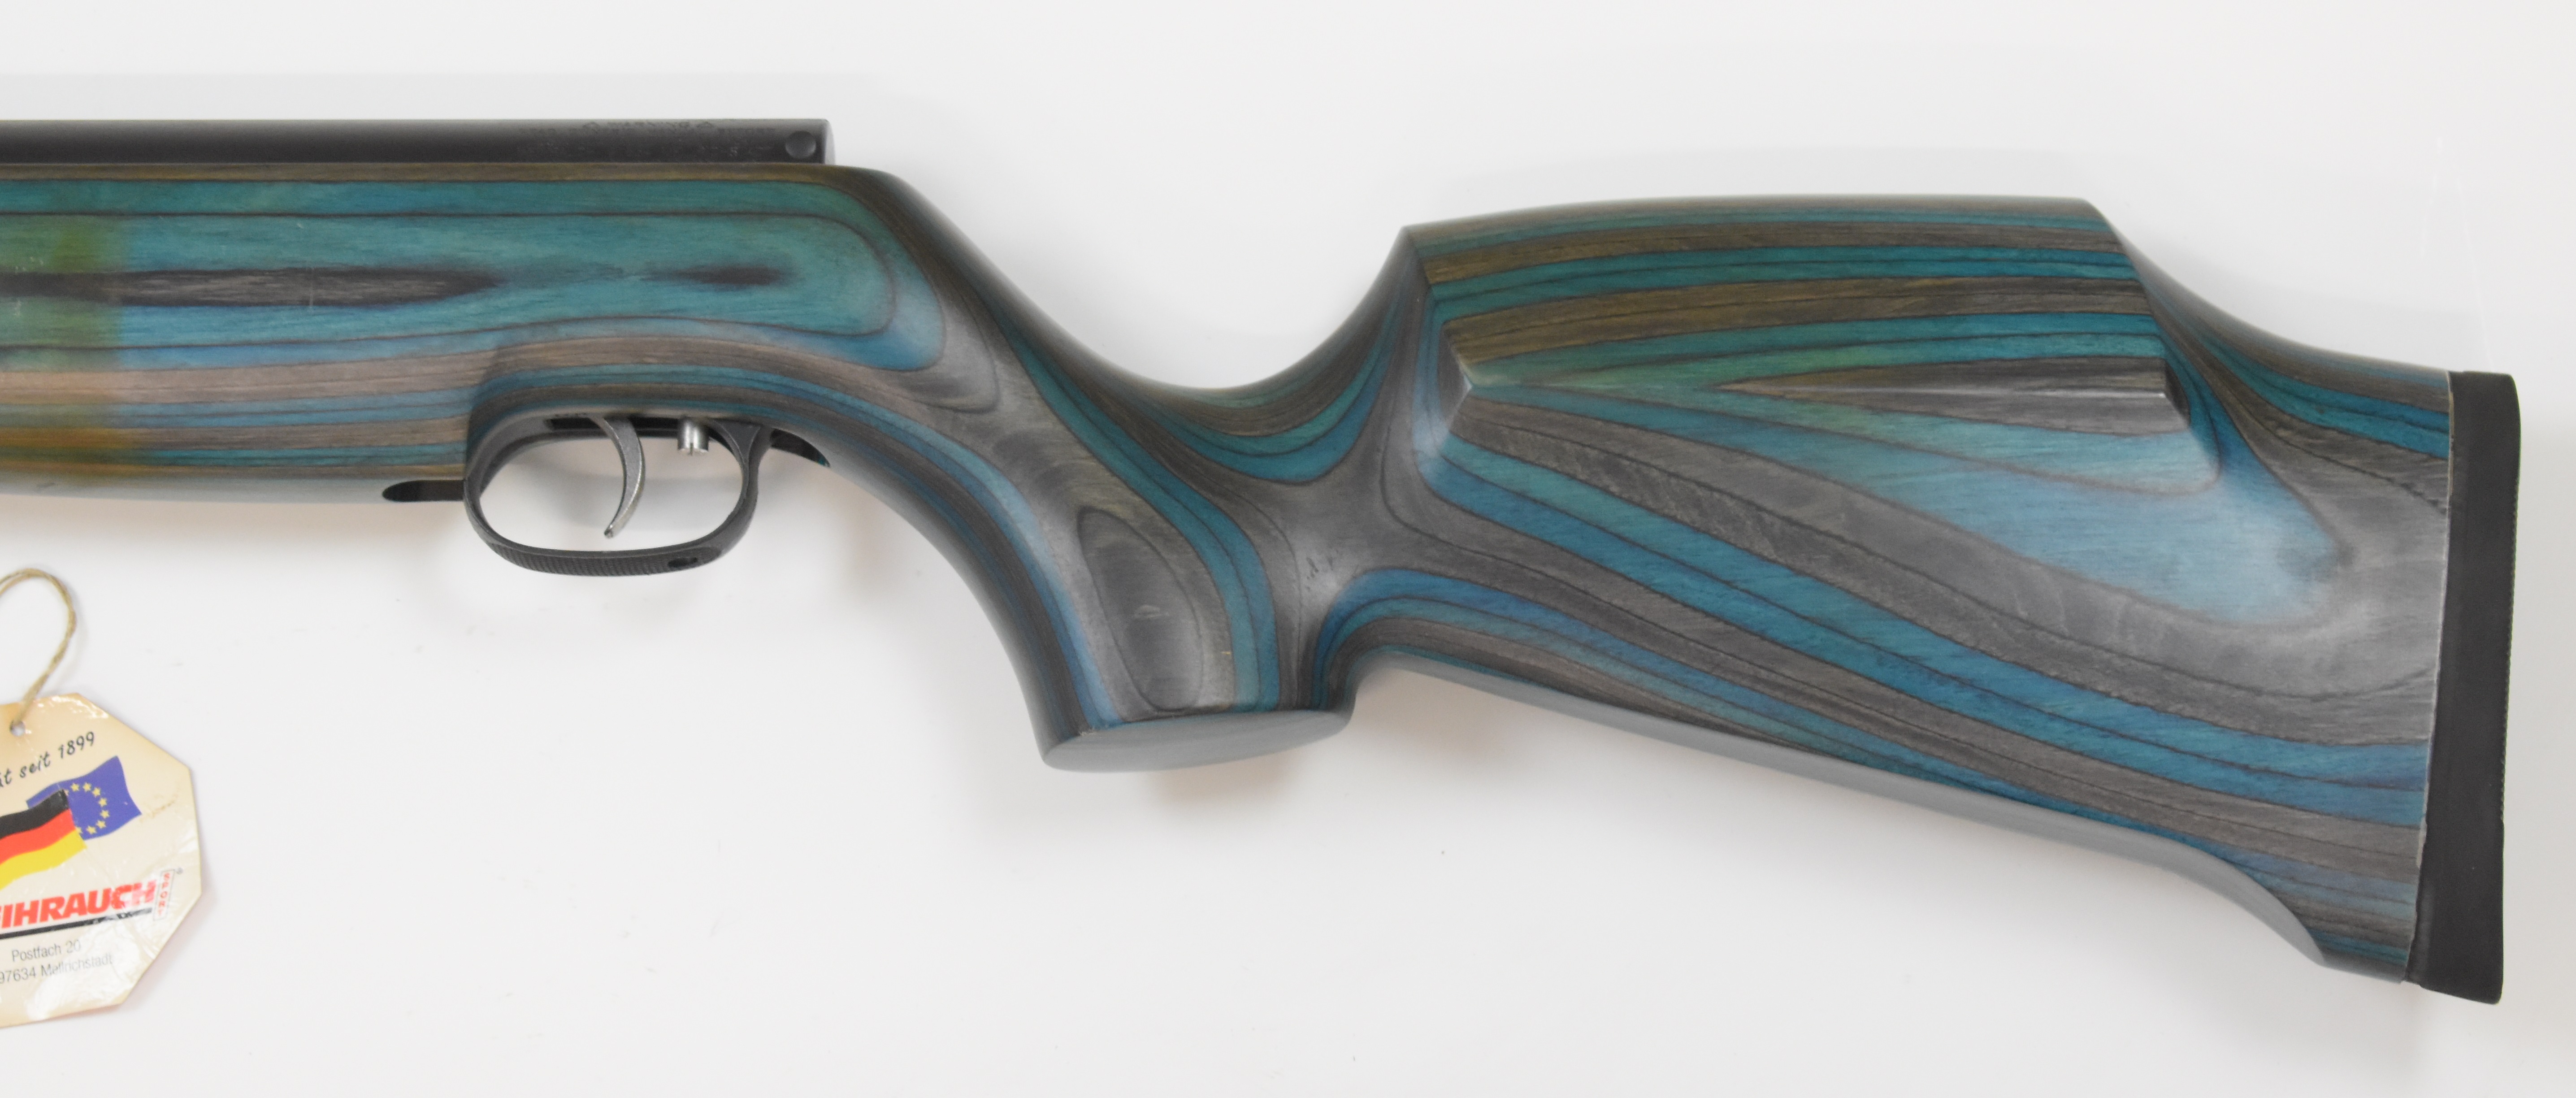 Weihrauch HW97K .177 underlever air rifle with blue laminated show wood stock, semi-pistol grip, - Image 8 of 10